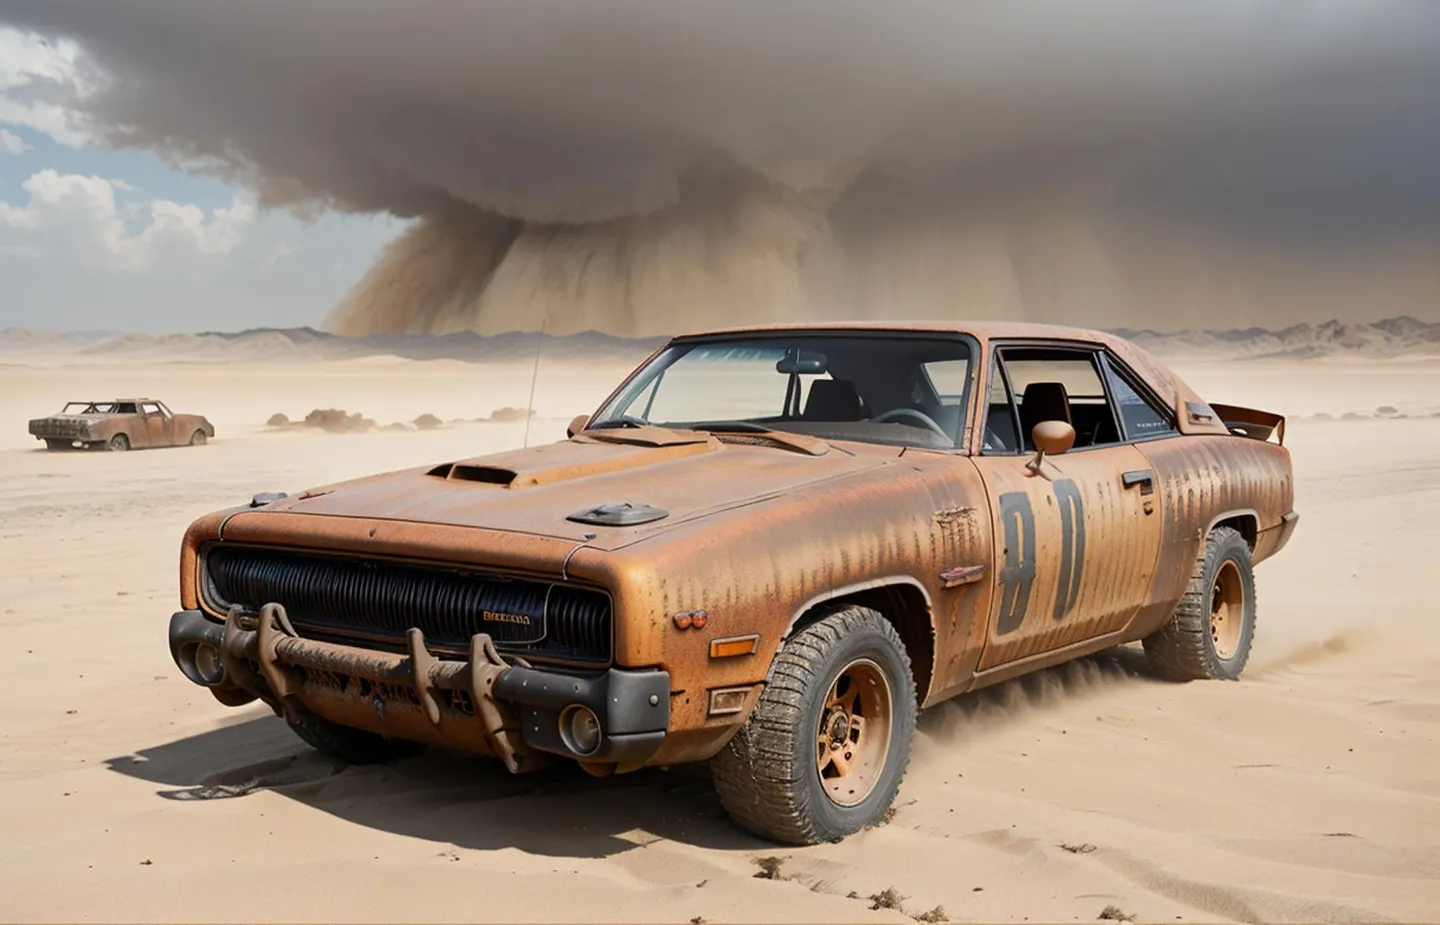 Rusty post-apocalyptic car in desert with approaching sandstorm, AI generated image using Stable Diffusion